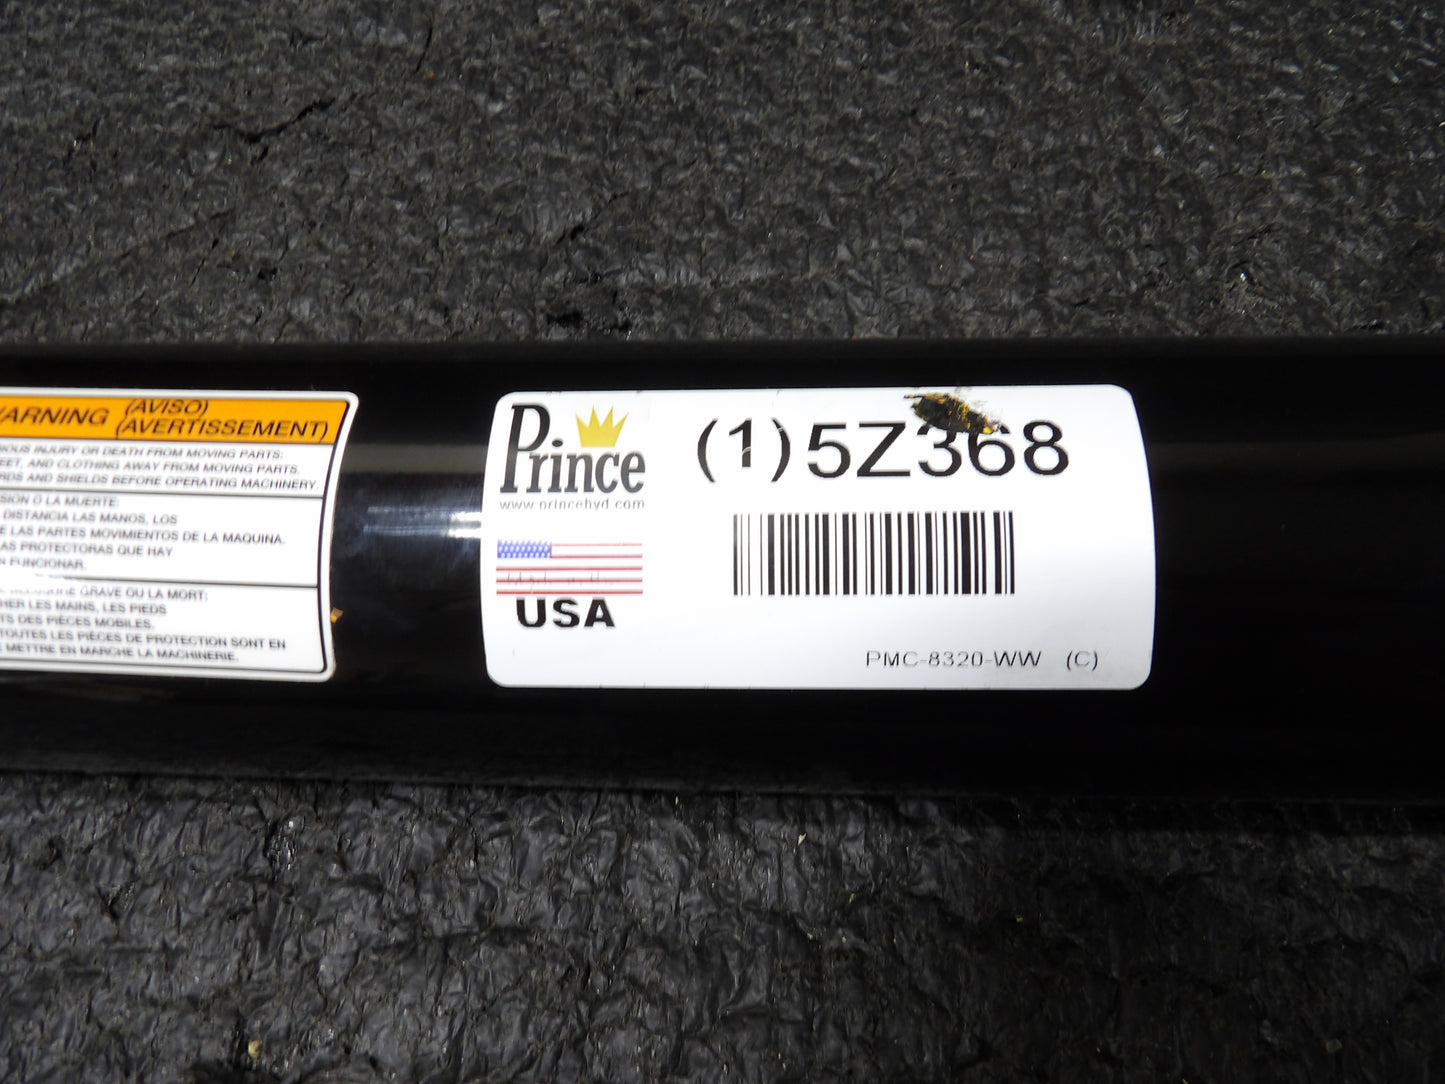 PRINCE Welded Hydraulic Cylinder: 20 in Stroke Lg, 28 in Retracted Lg, Full PSI, 1 1/2 in Rod Dia. (CR00856-WTA24)